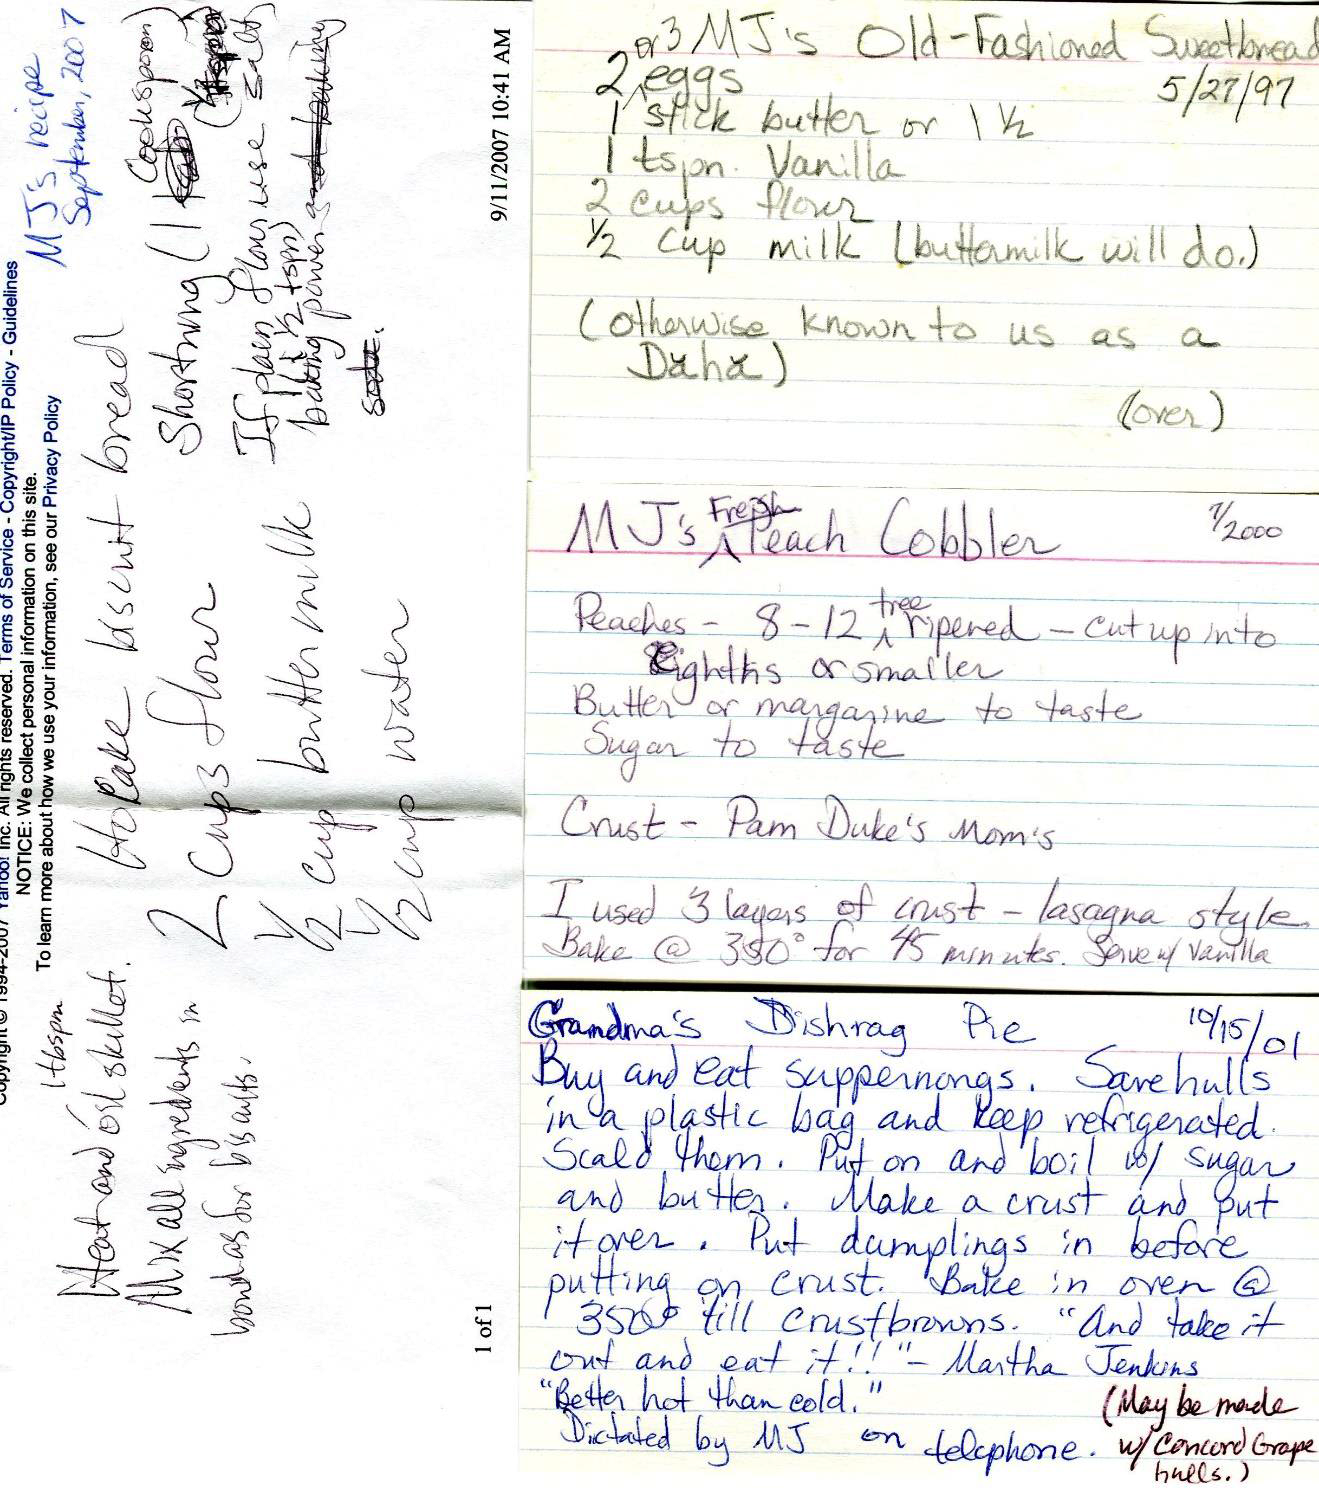 Handwritten recipe notes for MJ’s Hocake Biscuit Bread, Old-Fashioned Sweetbread, and Grandma’s Dishrag Pie
                    Hocake Buscuit Bread - MJ’s Recipe — September 2007
                    2 cups flour
                    ½ cup buttermilk
                    ½ cup water
                    Shortening 1 cookspoon
                    If plain flour, use salt
                    1 ½ tsp baking powder
                    Heat and oil skillet (1 tbspoon)
                    Mix all ingredients in bowl as for buscuits
                    MJ’s Fresh Peach Cobbler — 7/2000
                    Peaches 8-12 tree-ripened — cut into eighths or smaller
                    Butter or margarine to taste
                    Sugar to taste
                    Crust — Pam Duke’s Mom’s
                    I used three layers of crust — lasagne style
                    Bake at 350 for 45 minutes. Serve w/ vanilla
                    Grandma’s Dishrag Pie — 10/15/01
                    Buy and eat scuppernongs. Save hulls in a plastic bag and refrigerate them. Scald them. Make a crust and put it over. Put dumplings in before putting on crust. Bake in oven at 350° till crust browns. ’And take it out and eat it!’’ Martha Jenkins ’Better than cold.’ Dictated by MJ on telephone. (May be made with Concord grape hulls.)